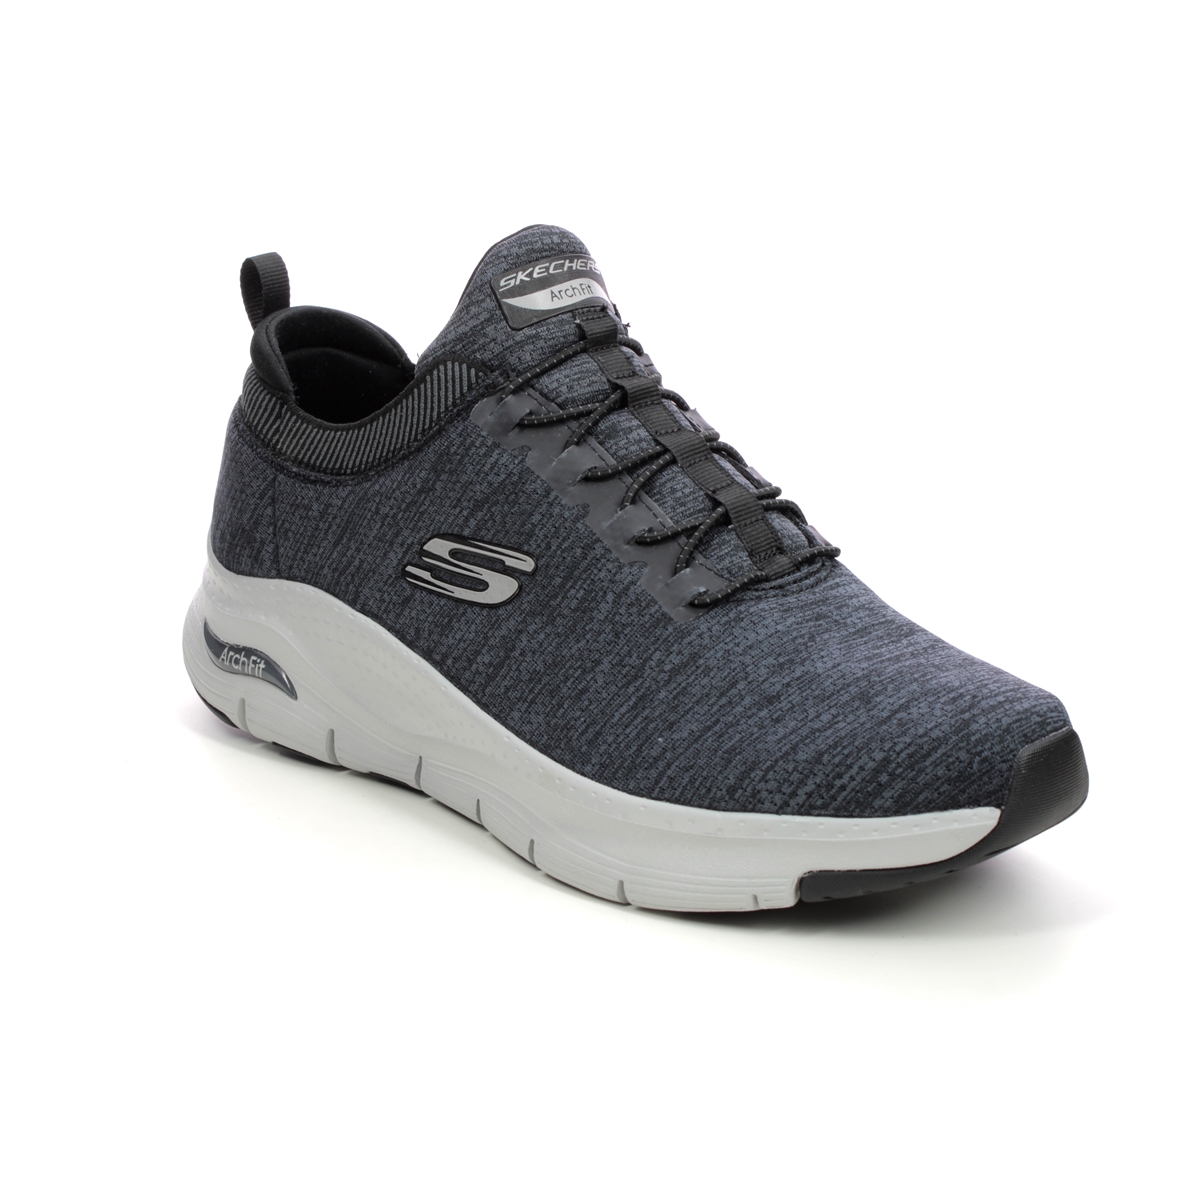 Skechers Arch Fit Mens Bungee BKGY Black grey Mens trainers 232301